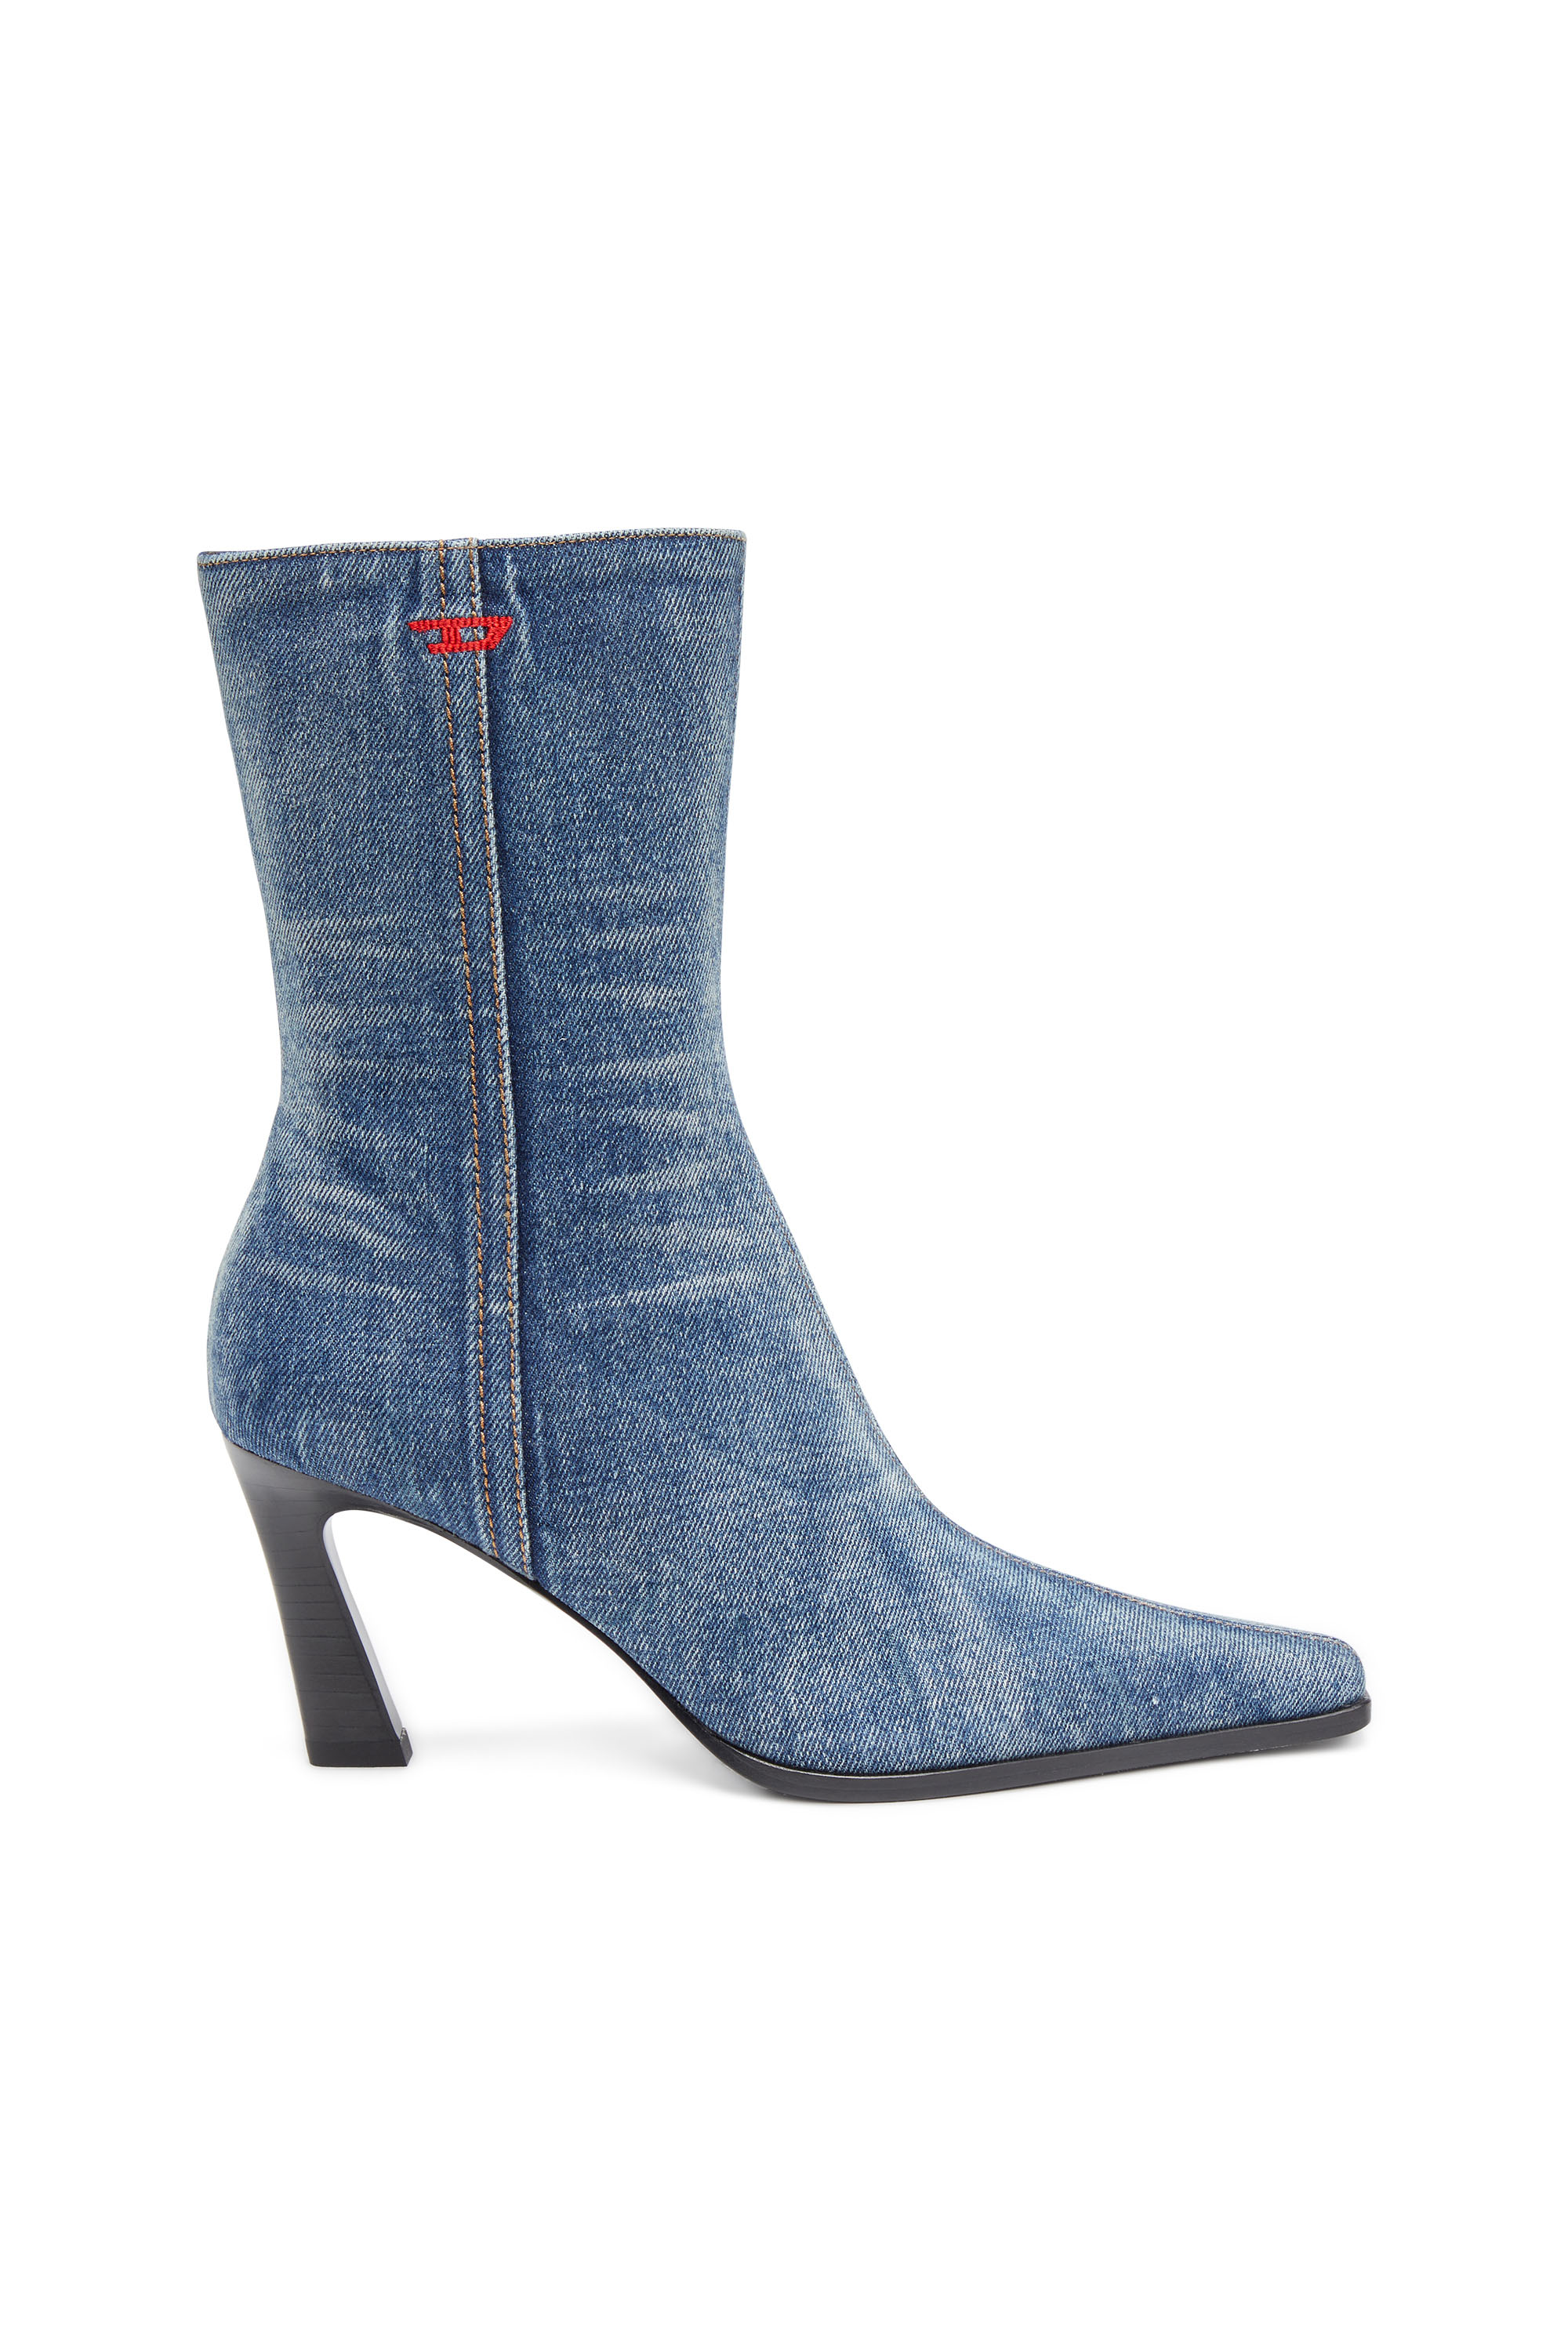 Women's Boots: High Heeled, Chelsea, Ankle Boots | Diesel®